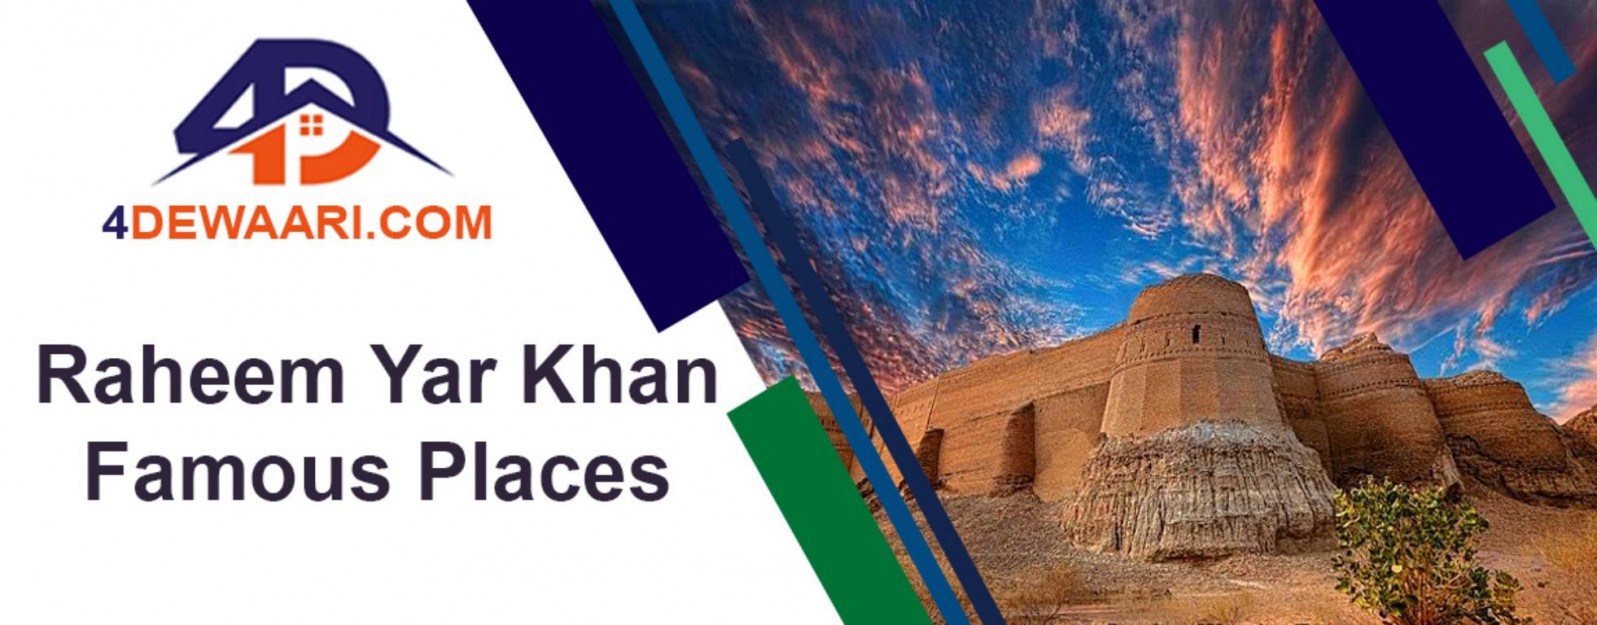 Raheem Yar Khan Famous Places to Visit in 2021